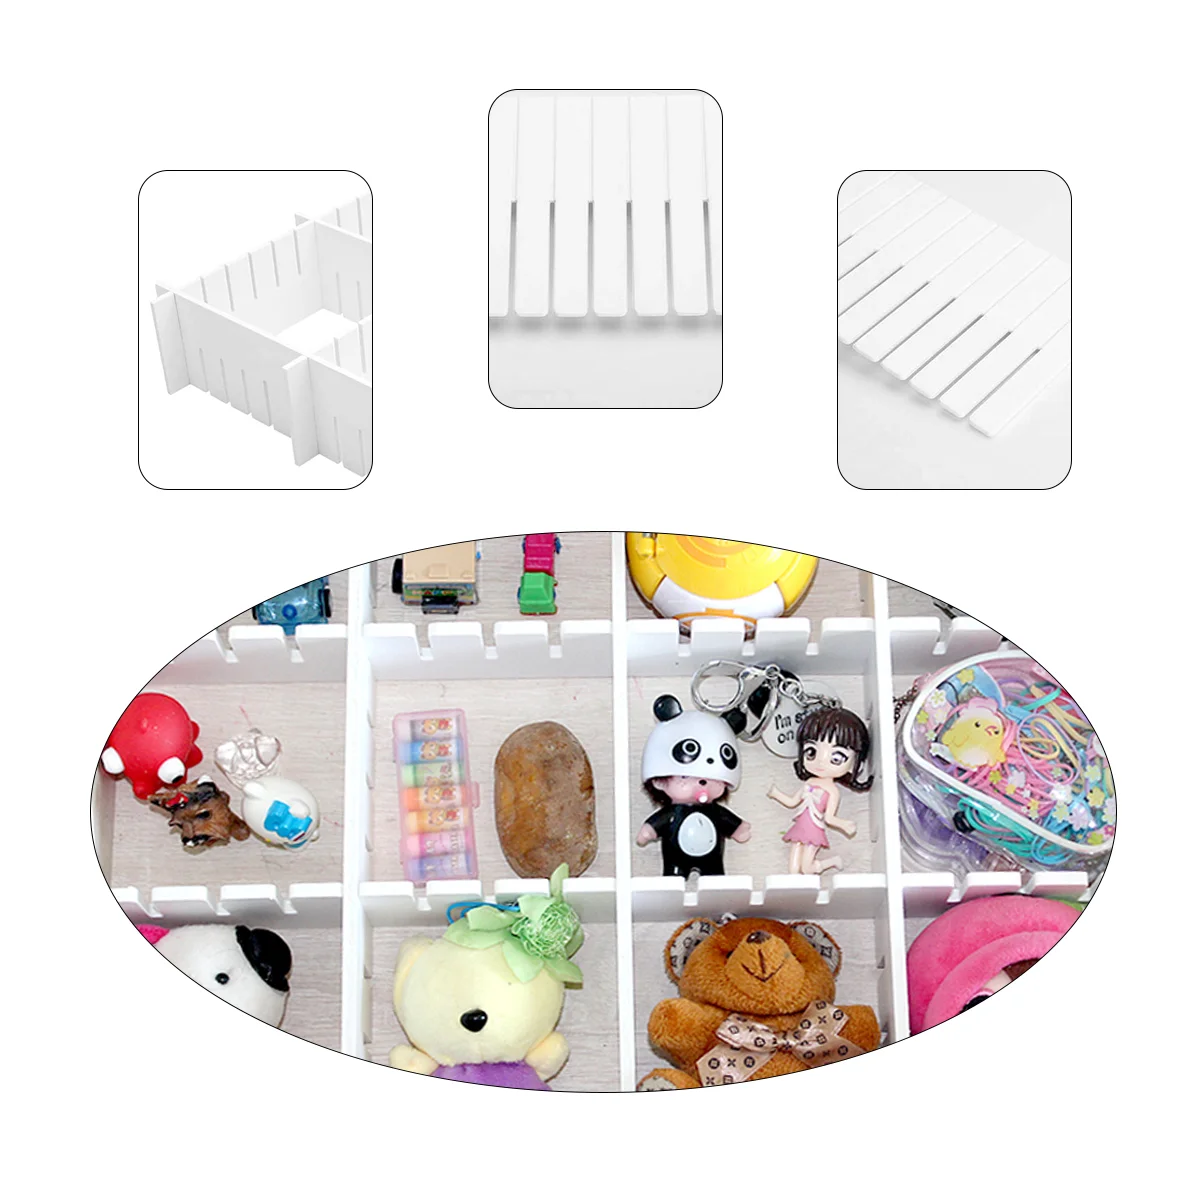 

34 Pcs Storage Drawers Plastic Divider Free Combination PP Partition Adjustable Separator Home White